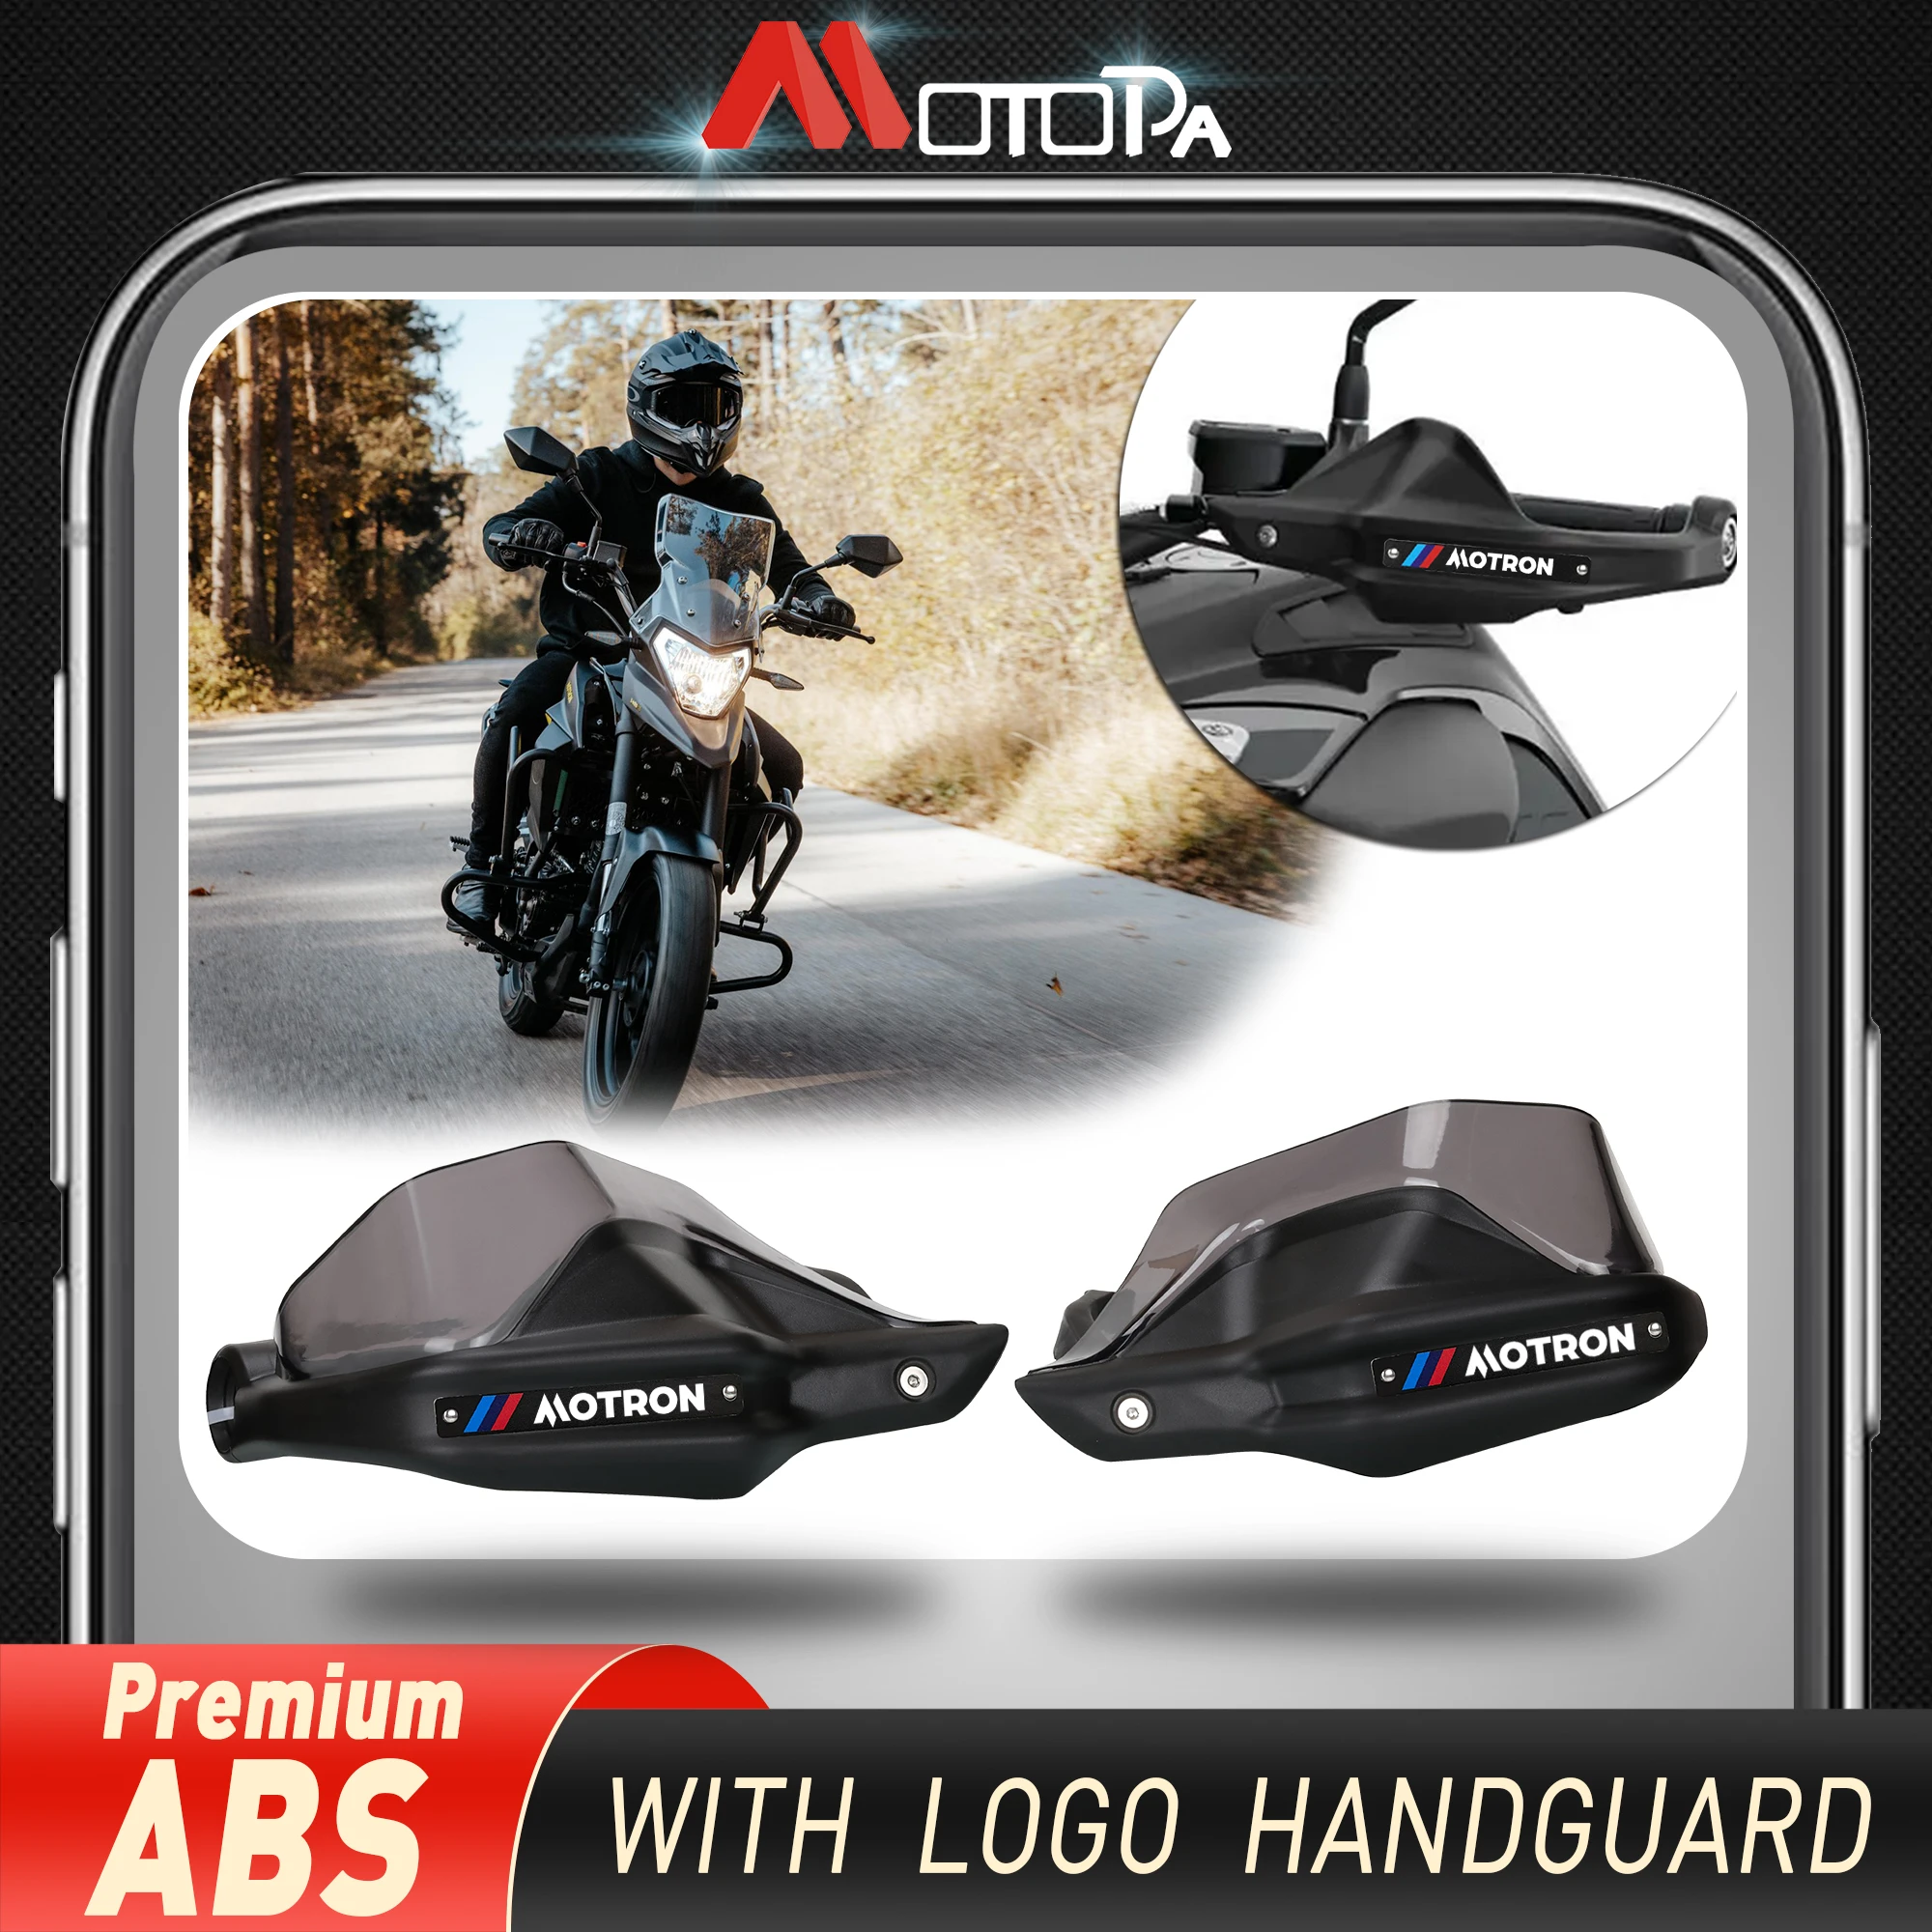 MOTOPA with logo Motron Motorcycle Handguard Hand Guards Shield for Motron XNord X Nord 125 X-Nord 125 with mounting bracket